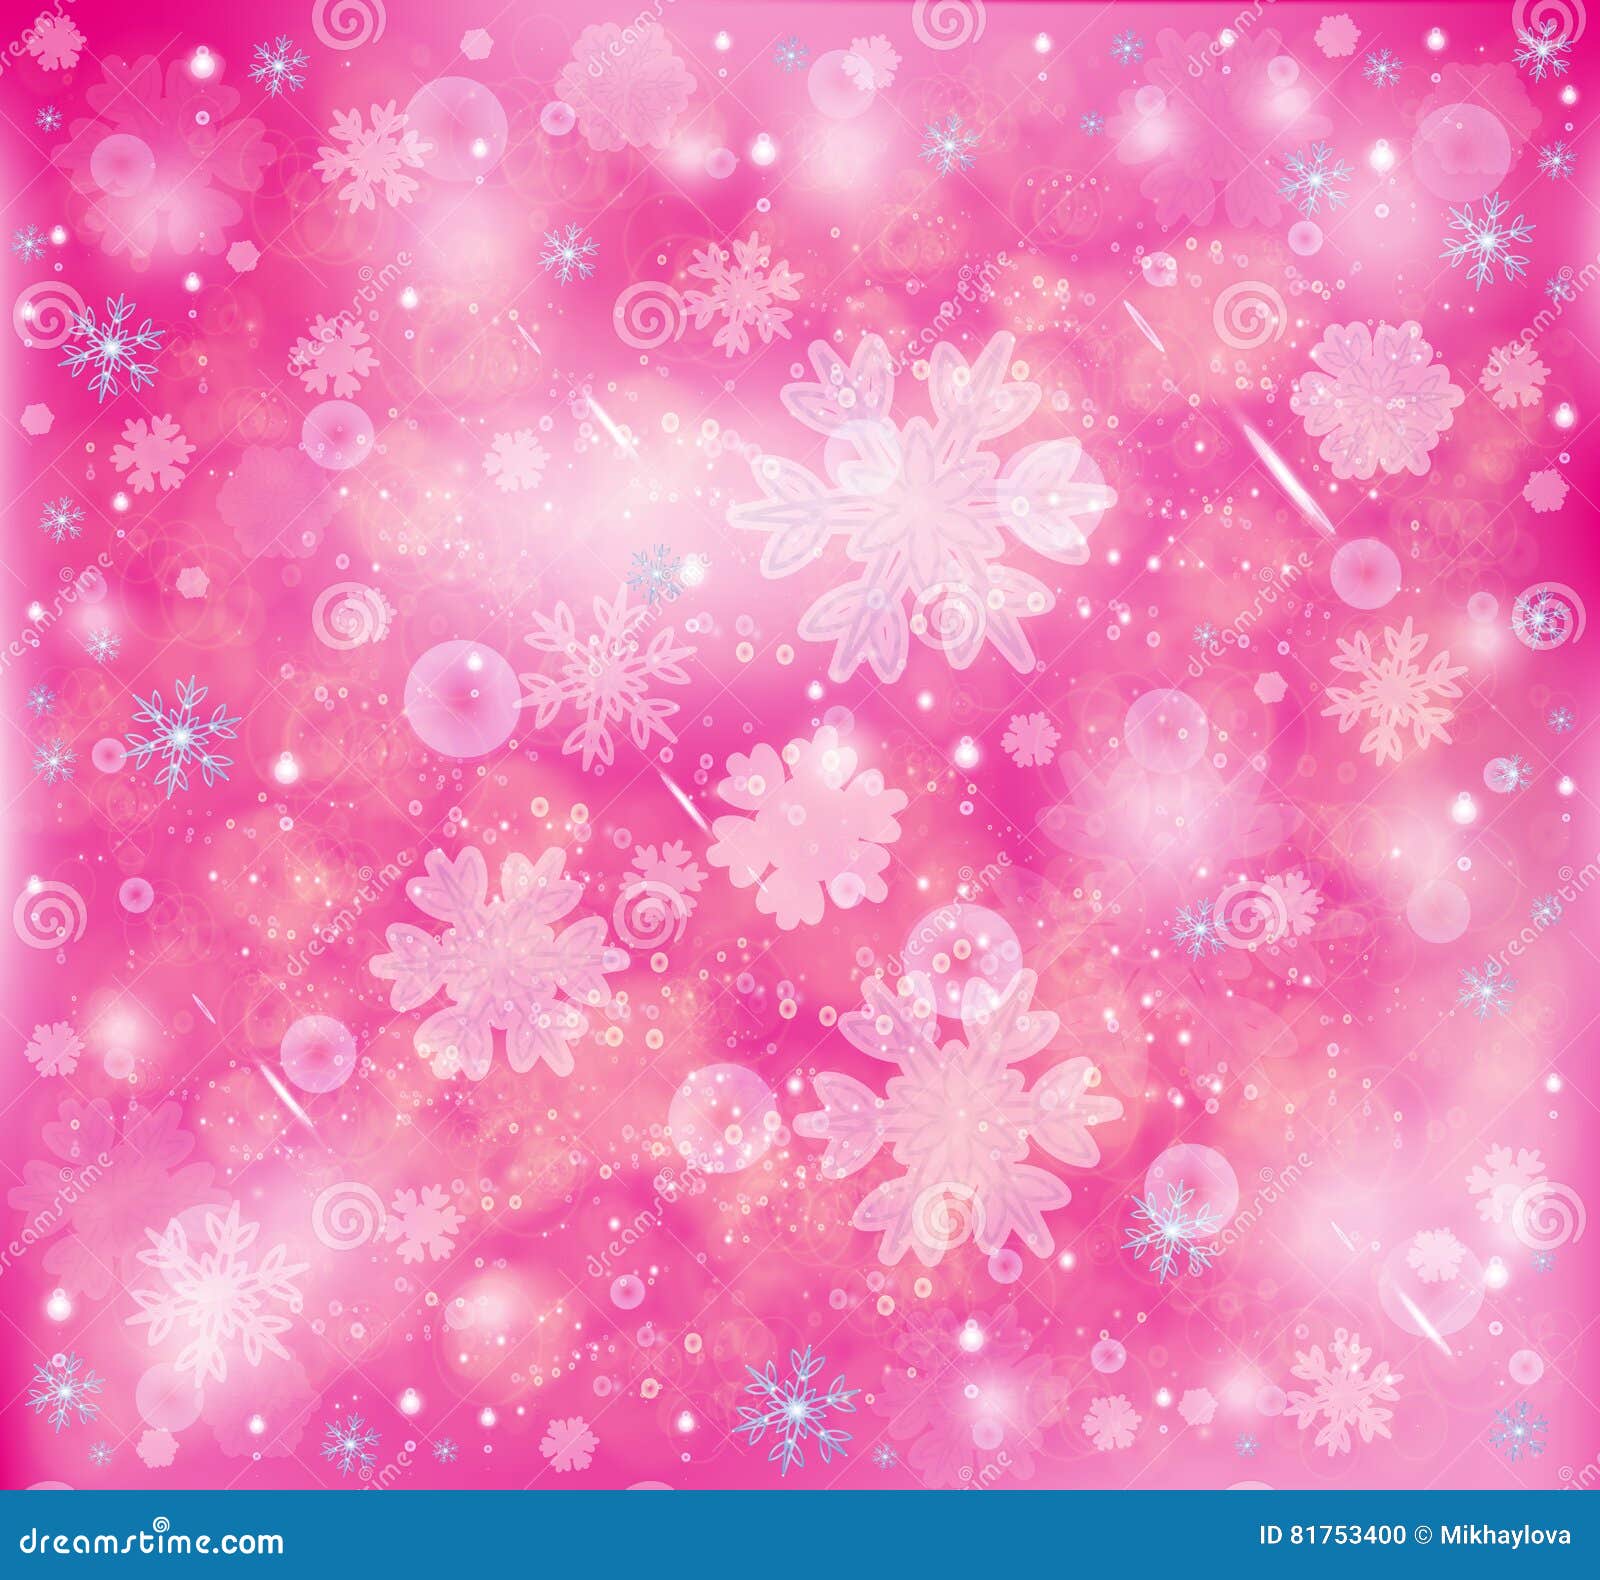 Snowflakes, Winter Frosty Snow Background Stock Vector - Illustration ...